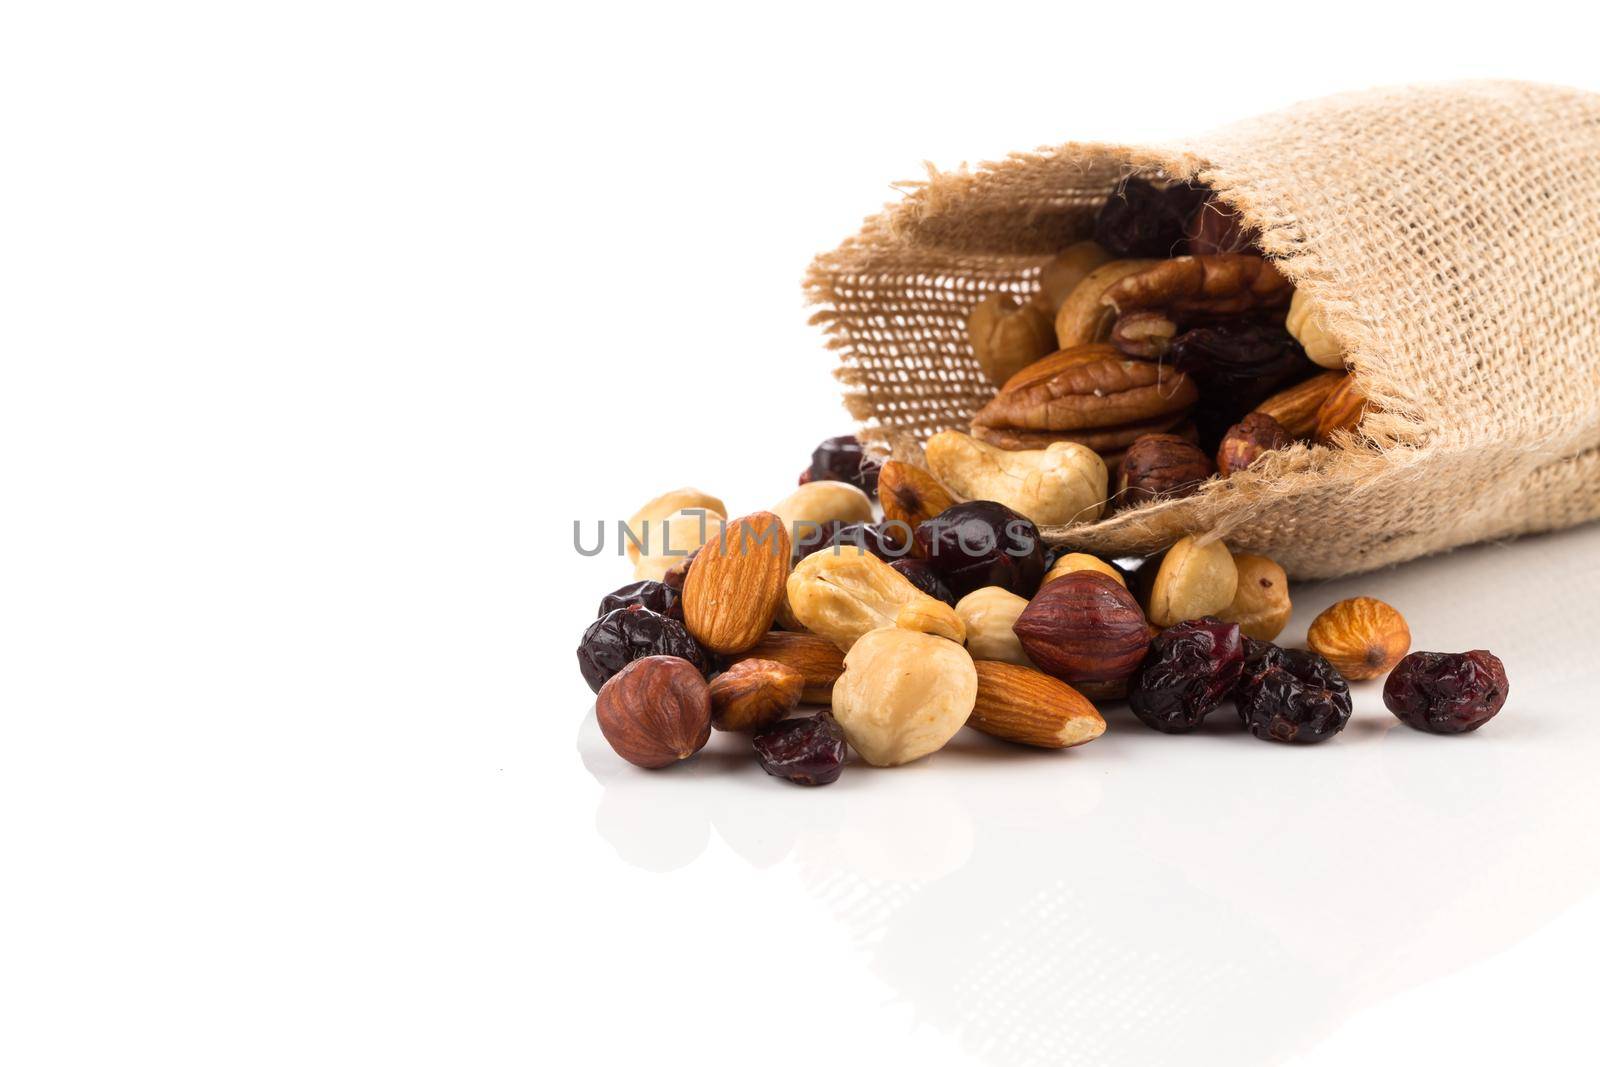 Mix nuts, dry fruits and grapes on a white background in hessian bag